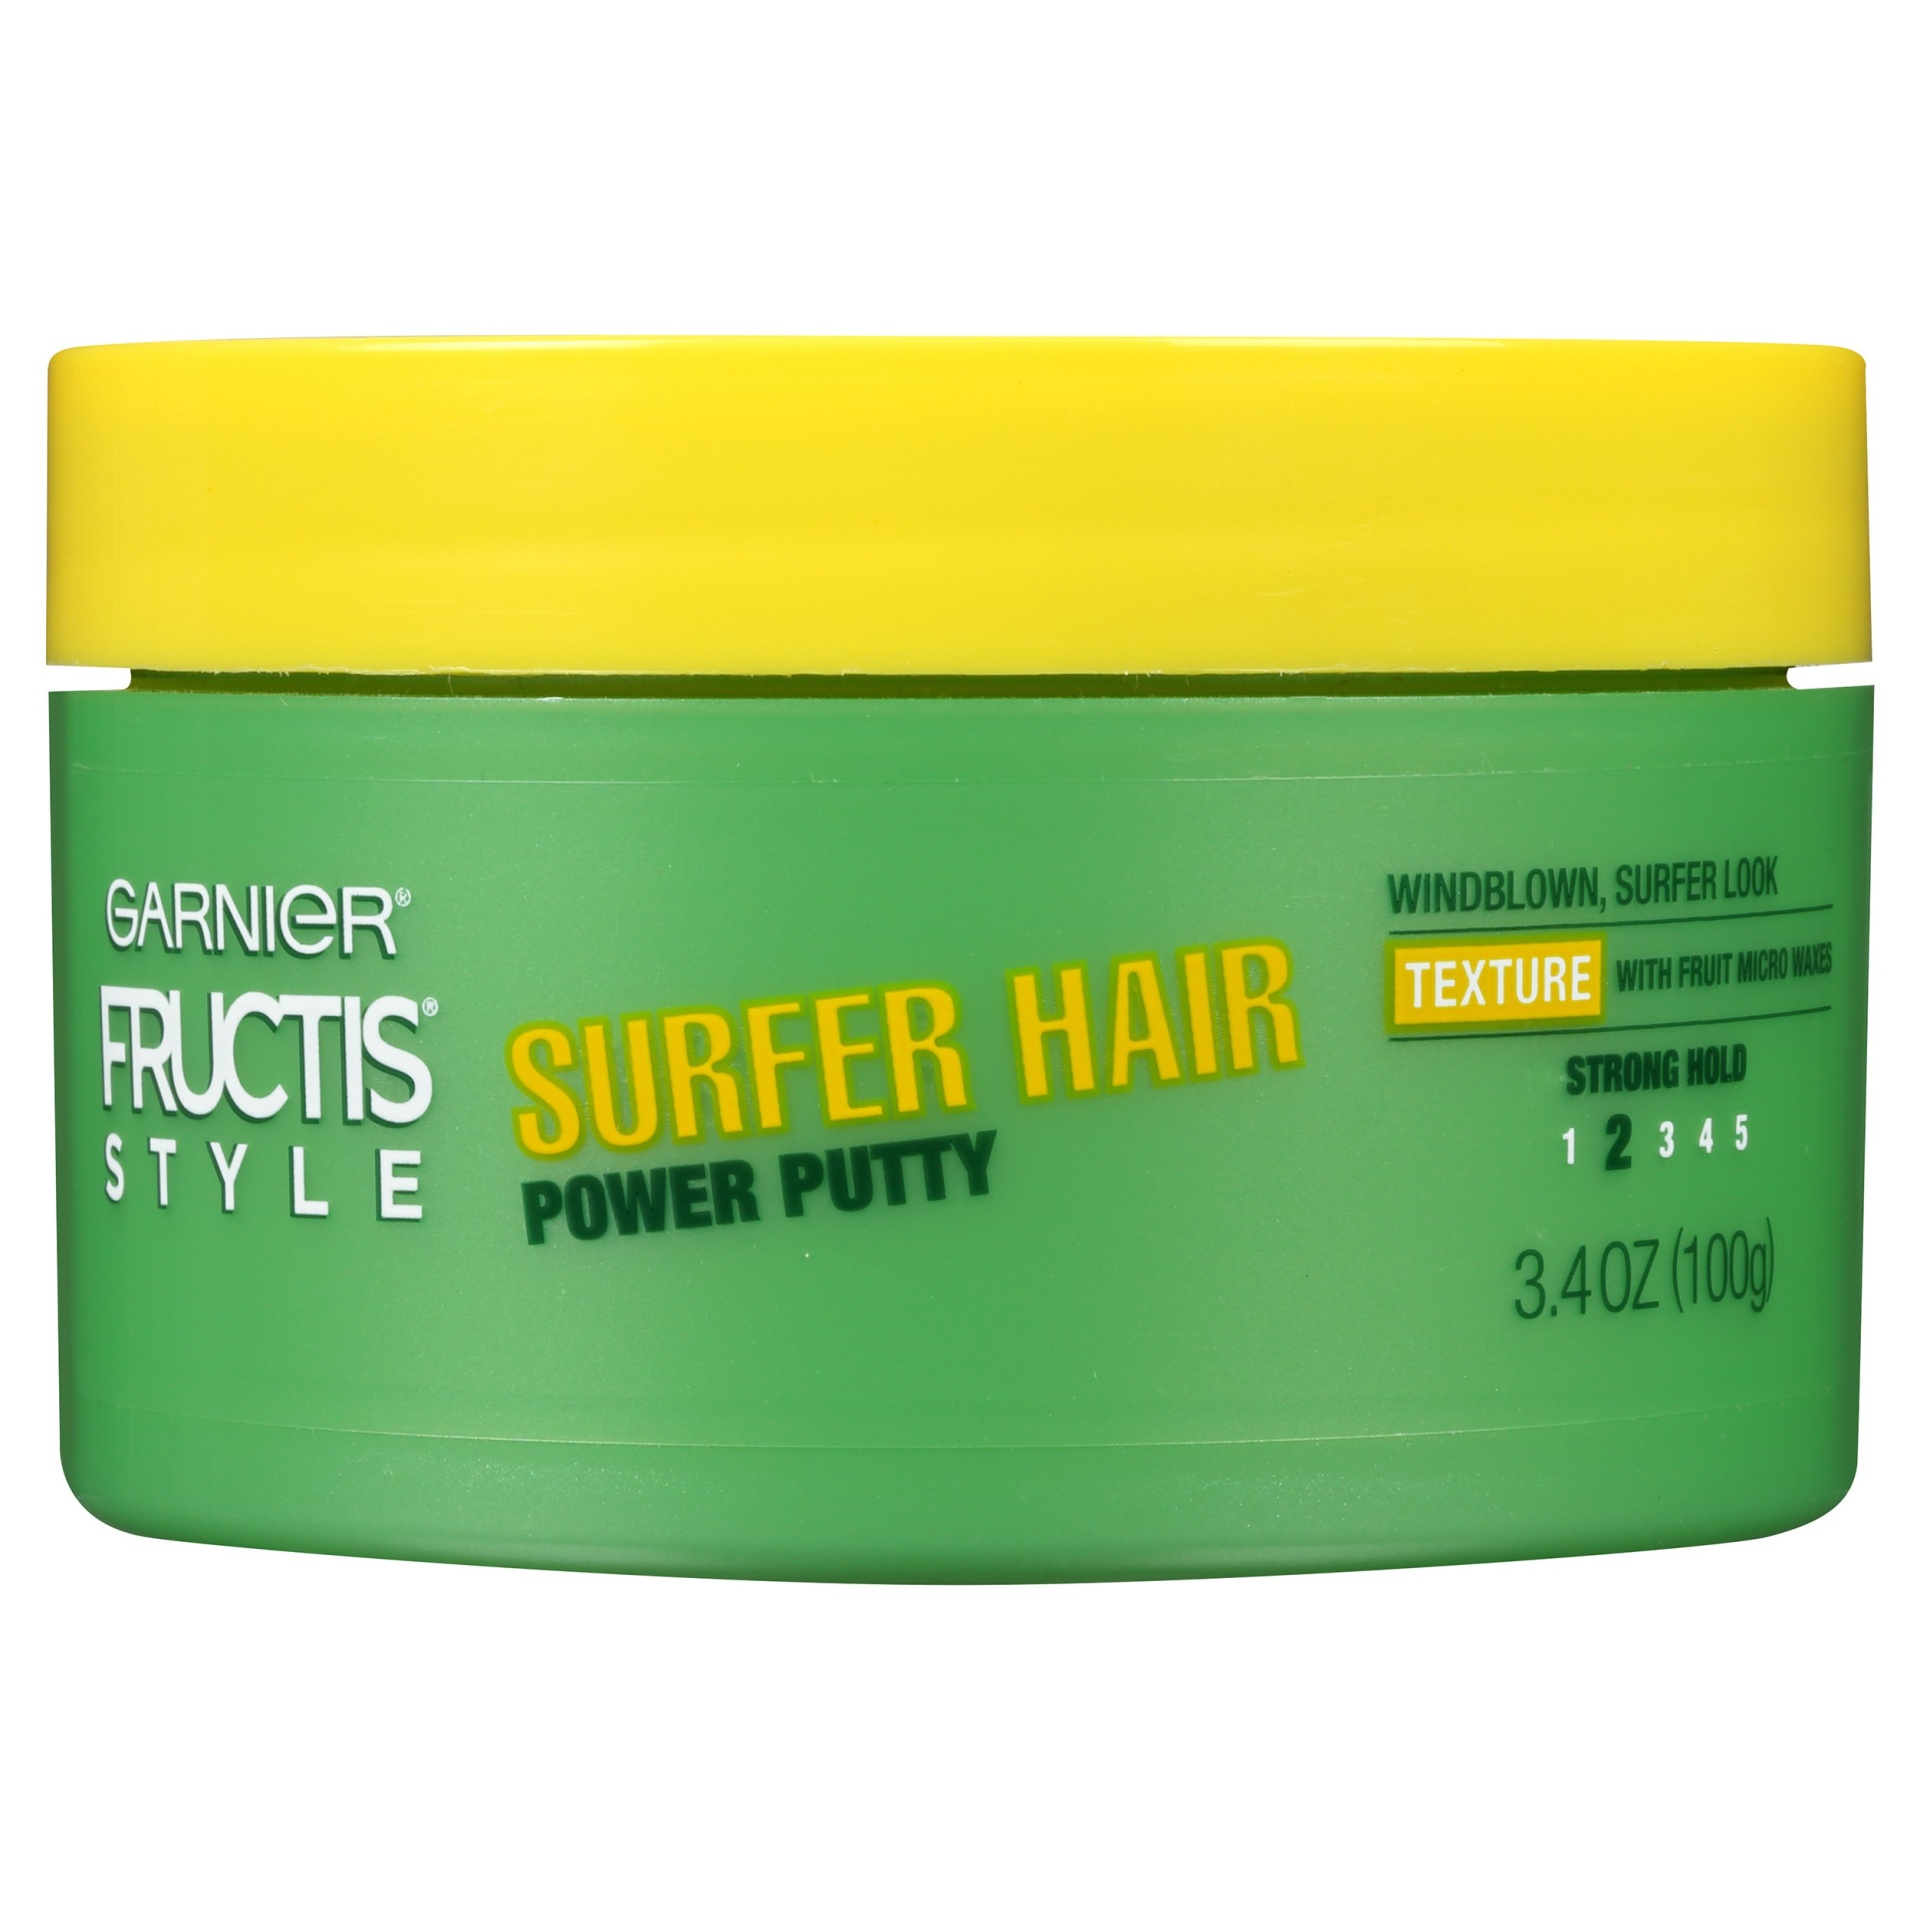 slide 1 of 7, Fructis Style Surfer Hair Power Putty - 3.4oz, 3.4 oz